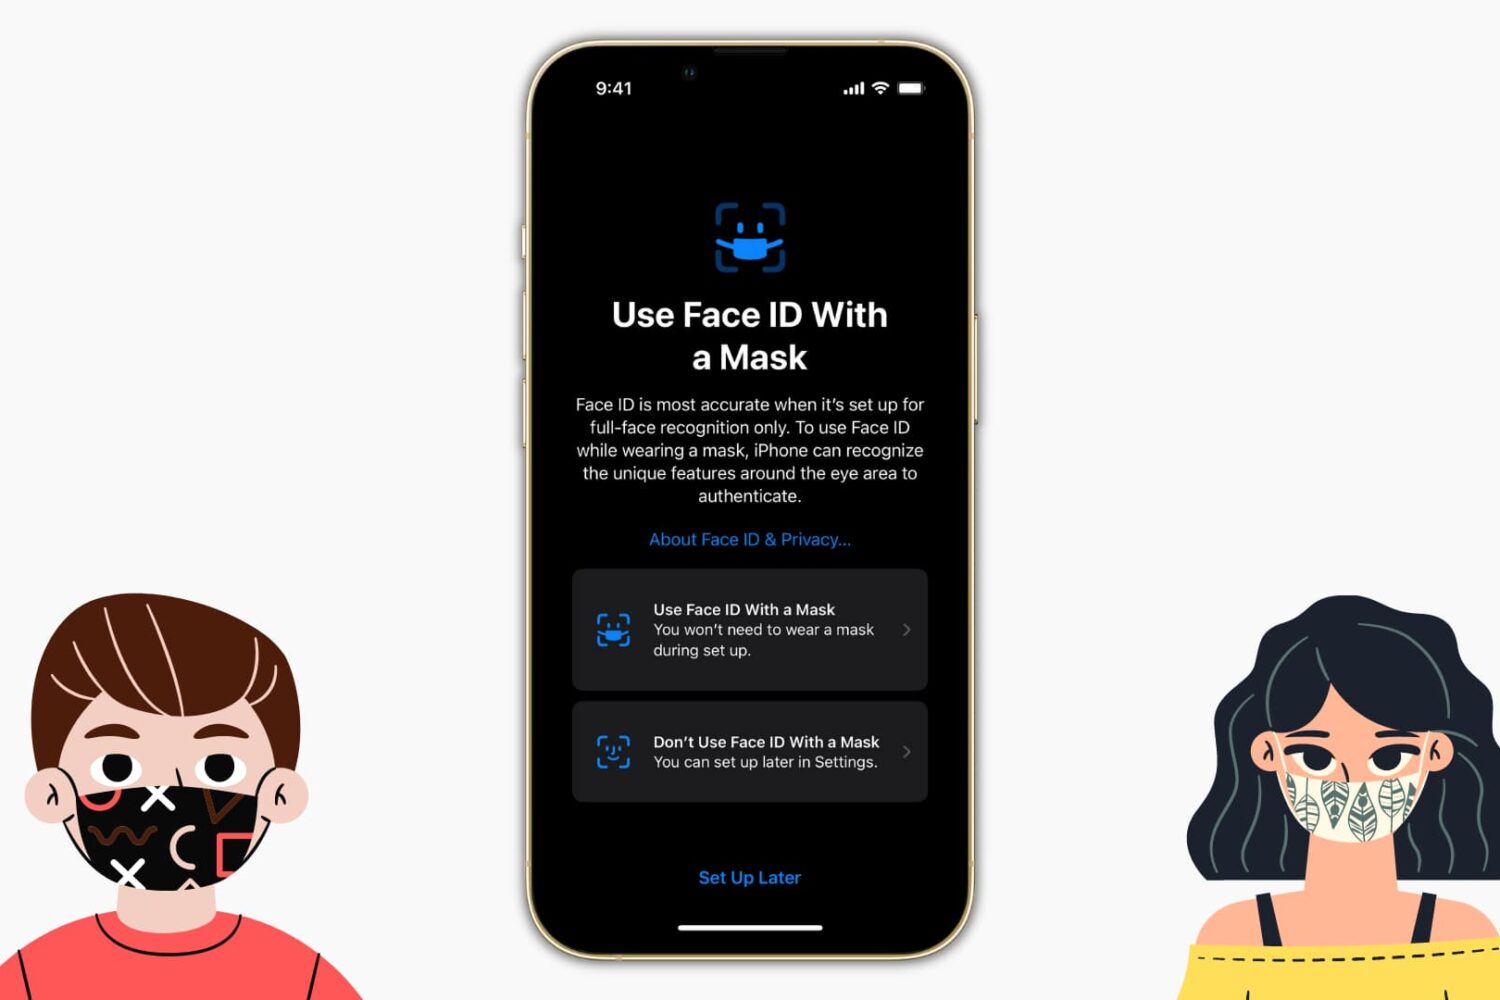 Use Face ID on iPhone while wearing a mask